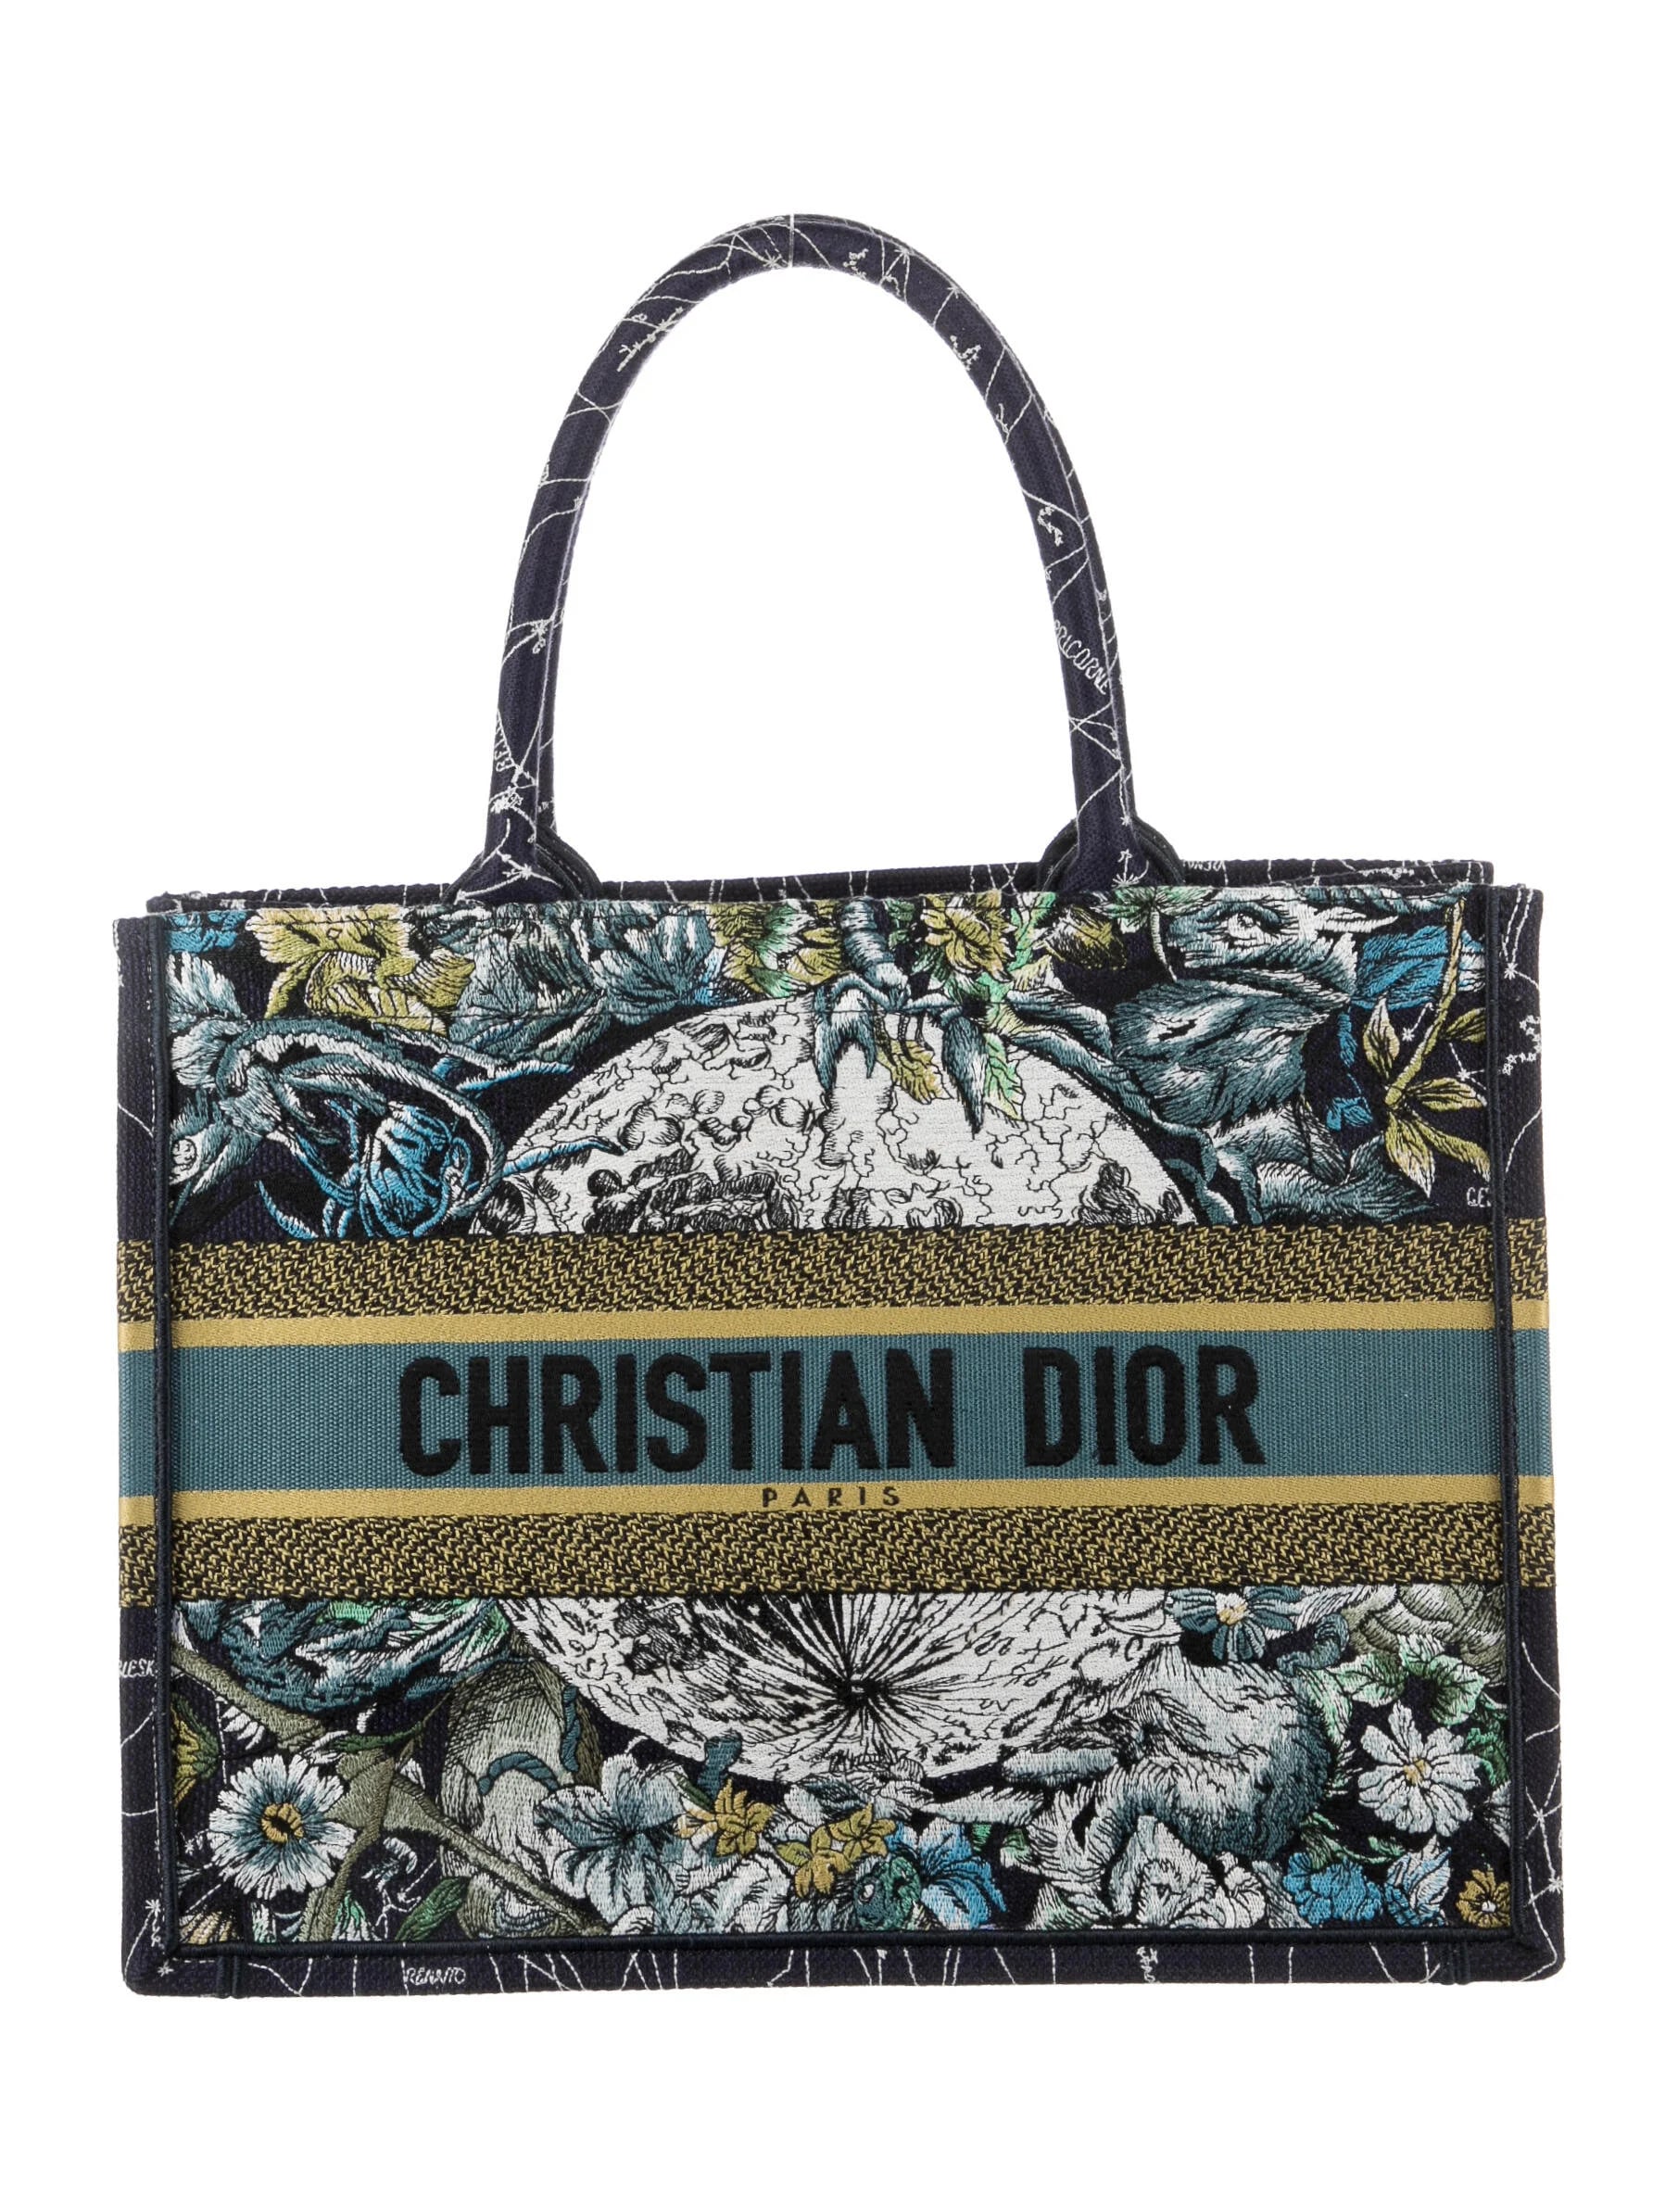 Thoughts on the Dior book tote : r/handbags